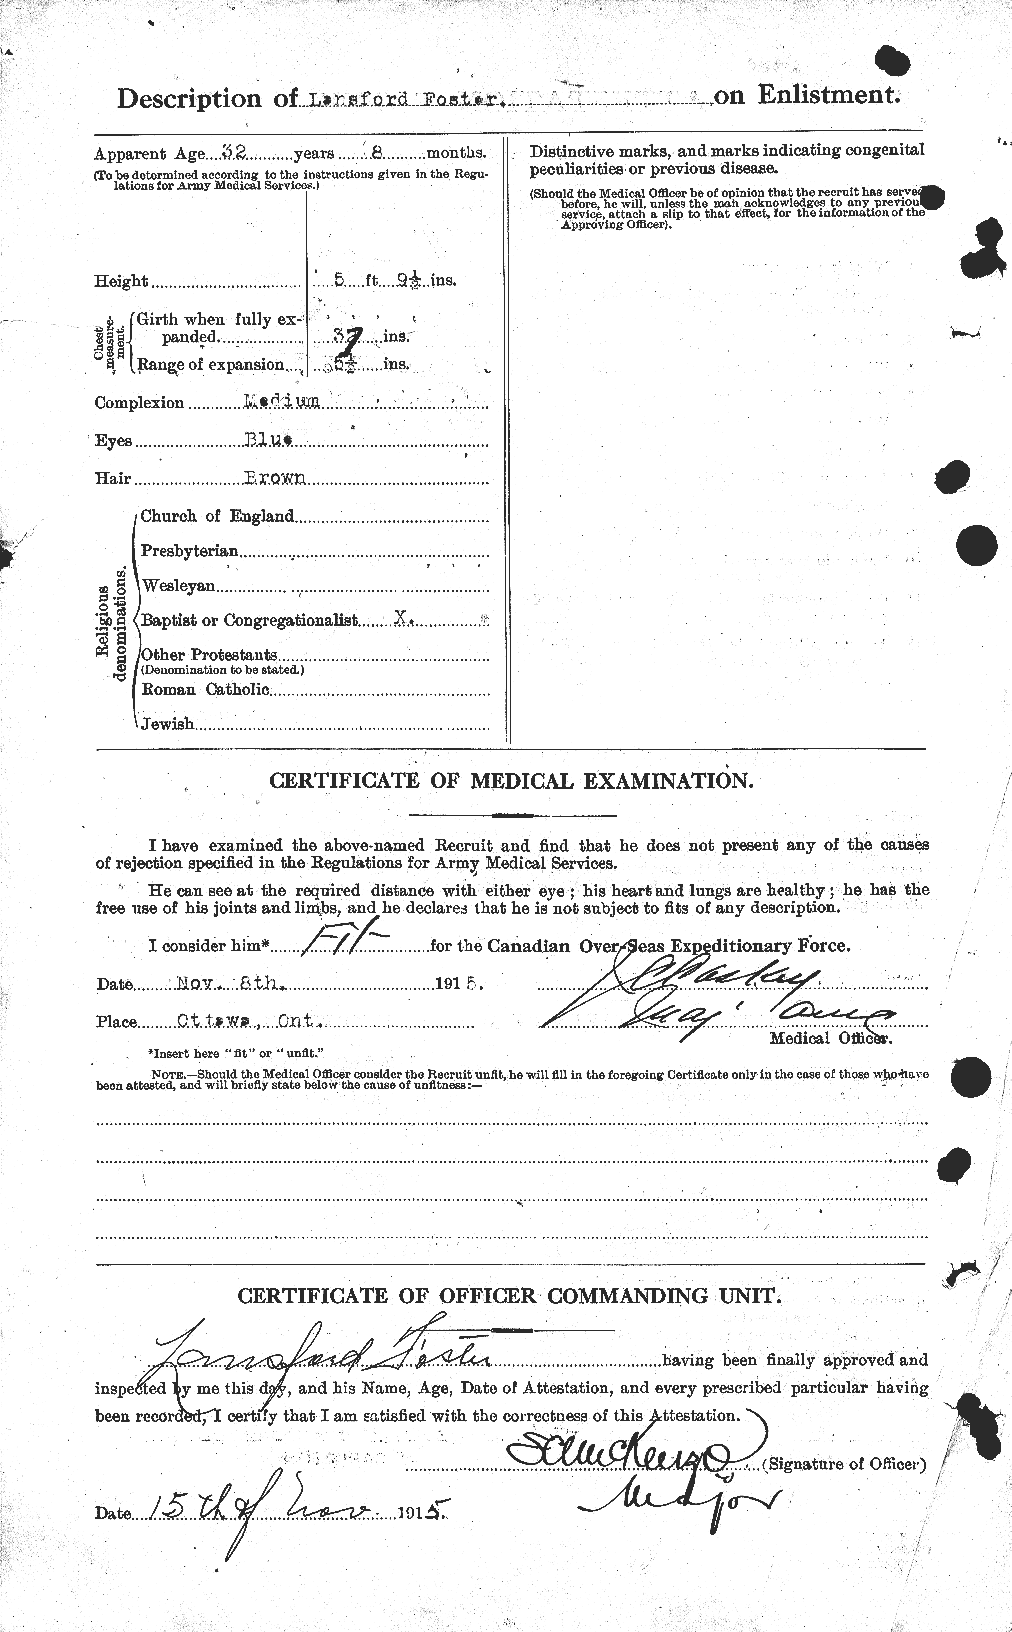 Personnel Records of the First World War - CEF 333397b